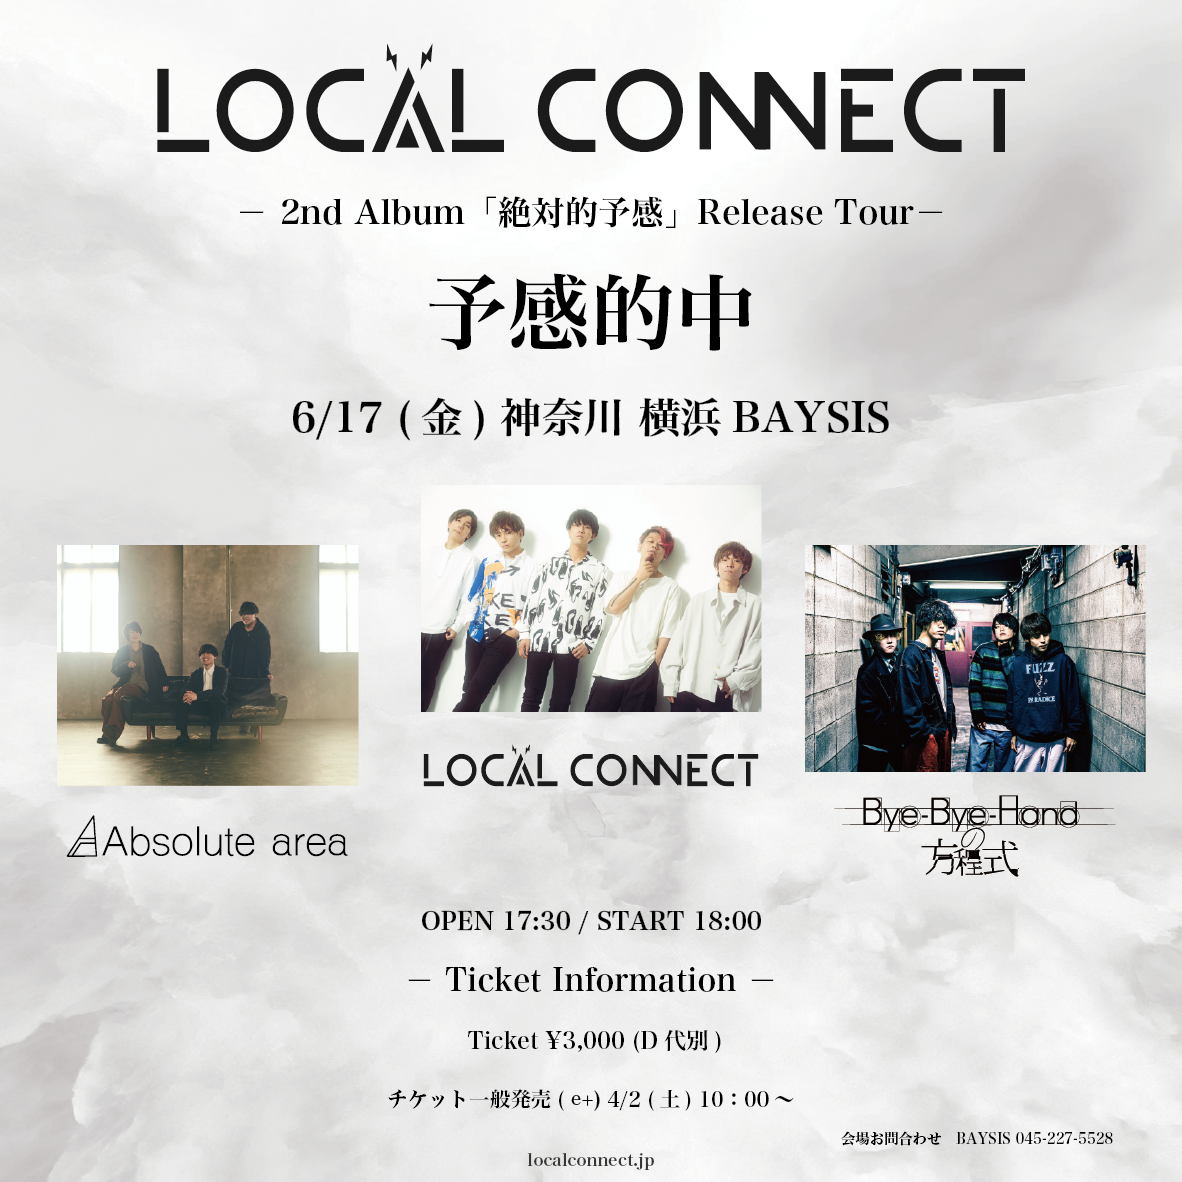 LOCAL CONNECT 2nd Album「絶対的予感」リリースツアー 【予感的中】